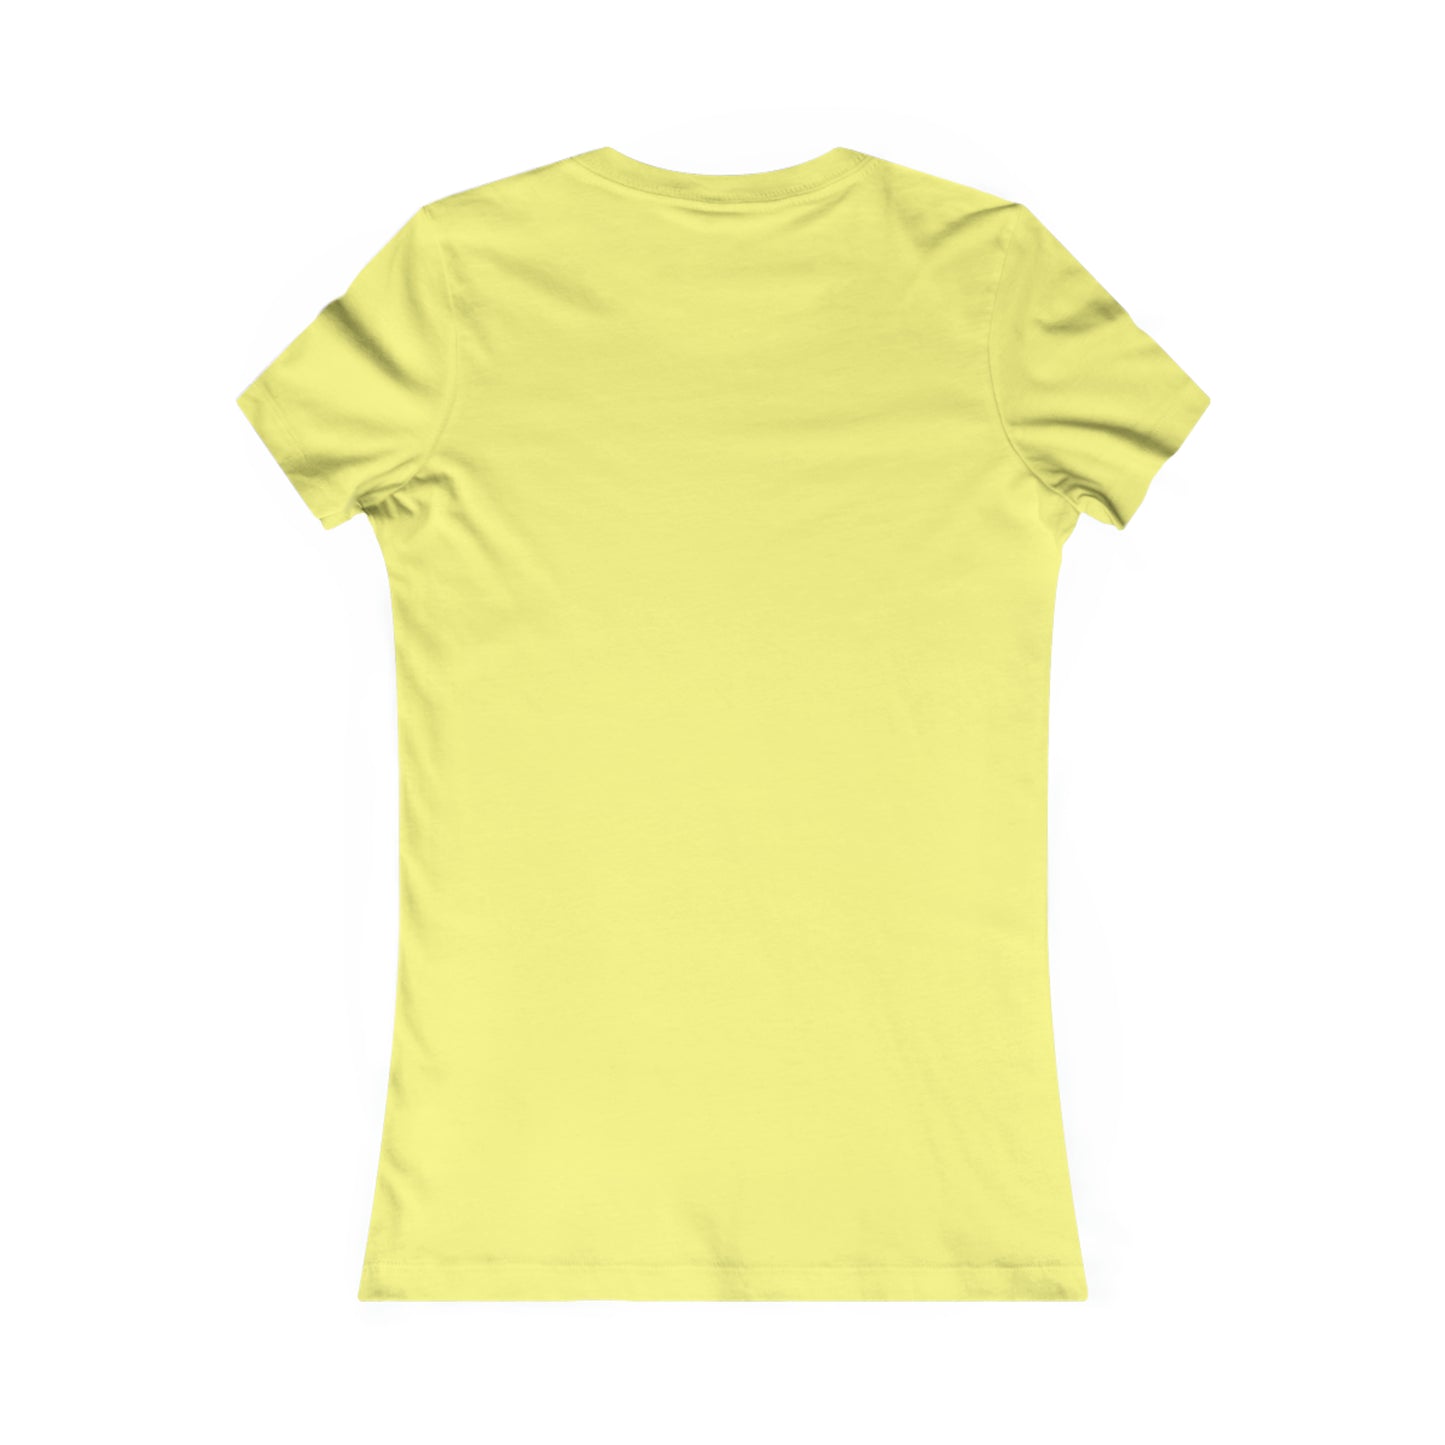 NAAMS Women's Design your Own Favorite Tee - 4.2 oz 100% airlume Cotton